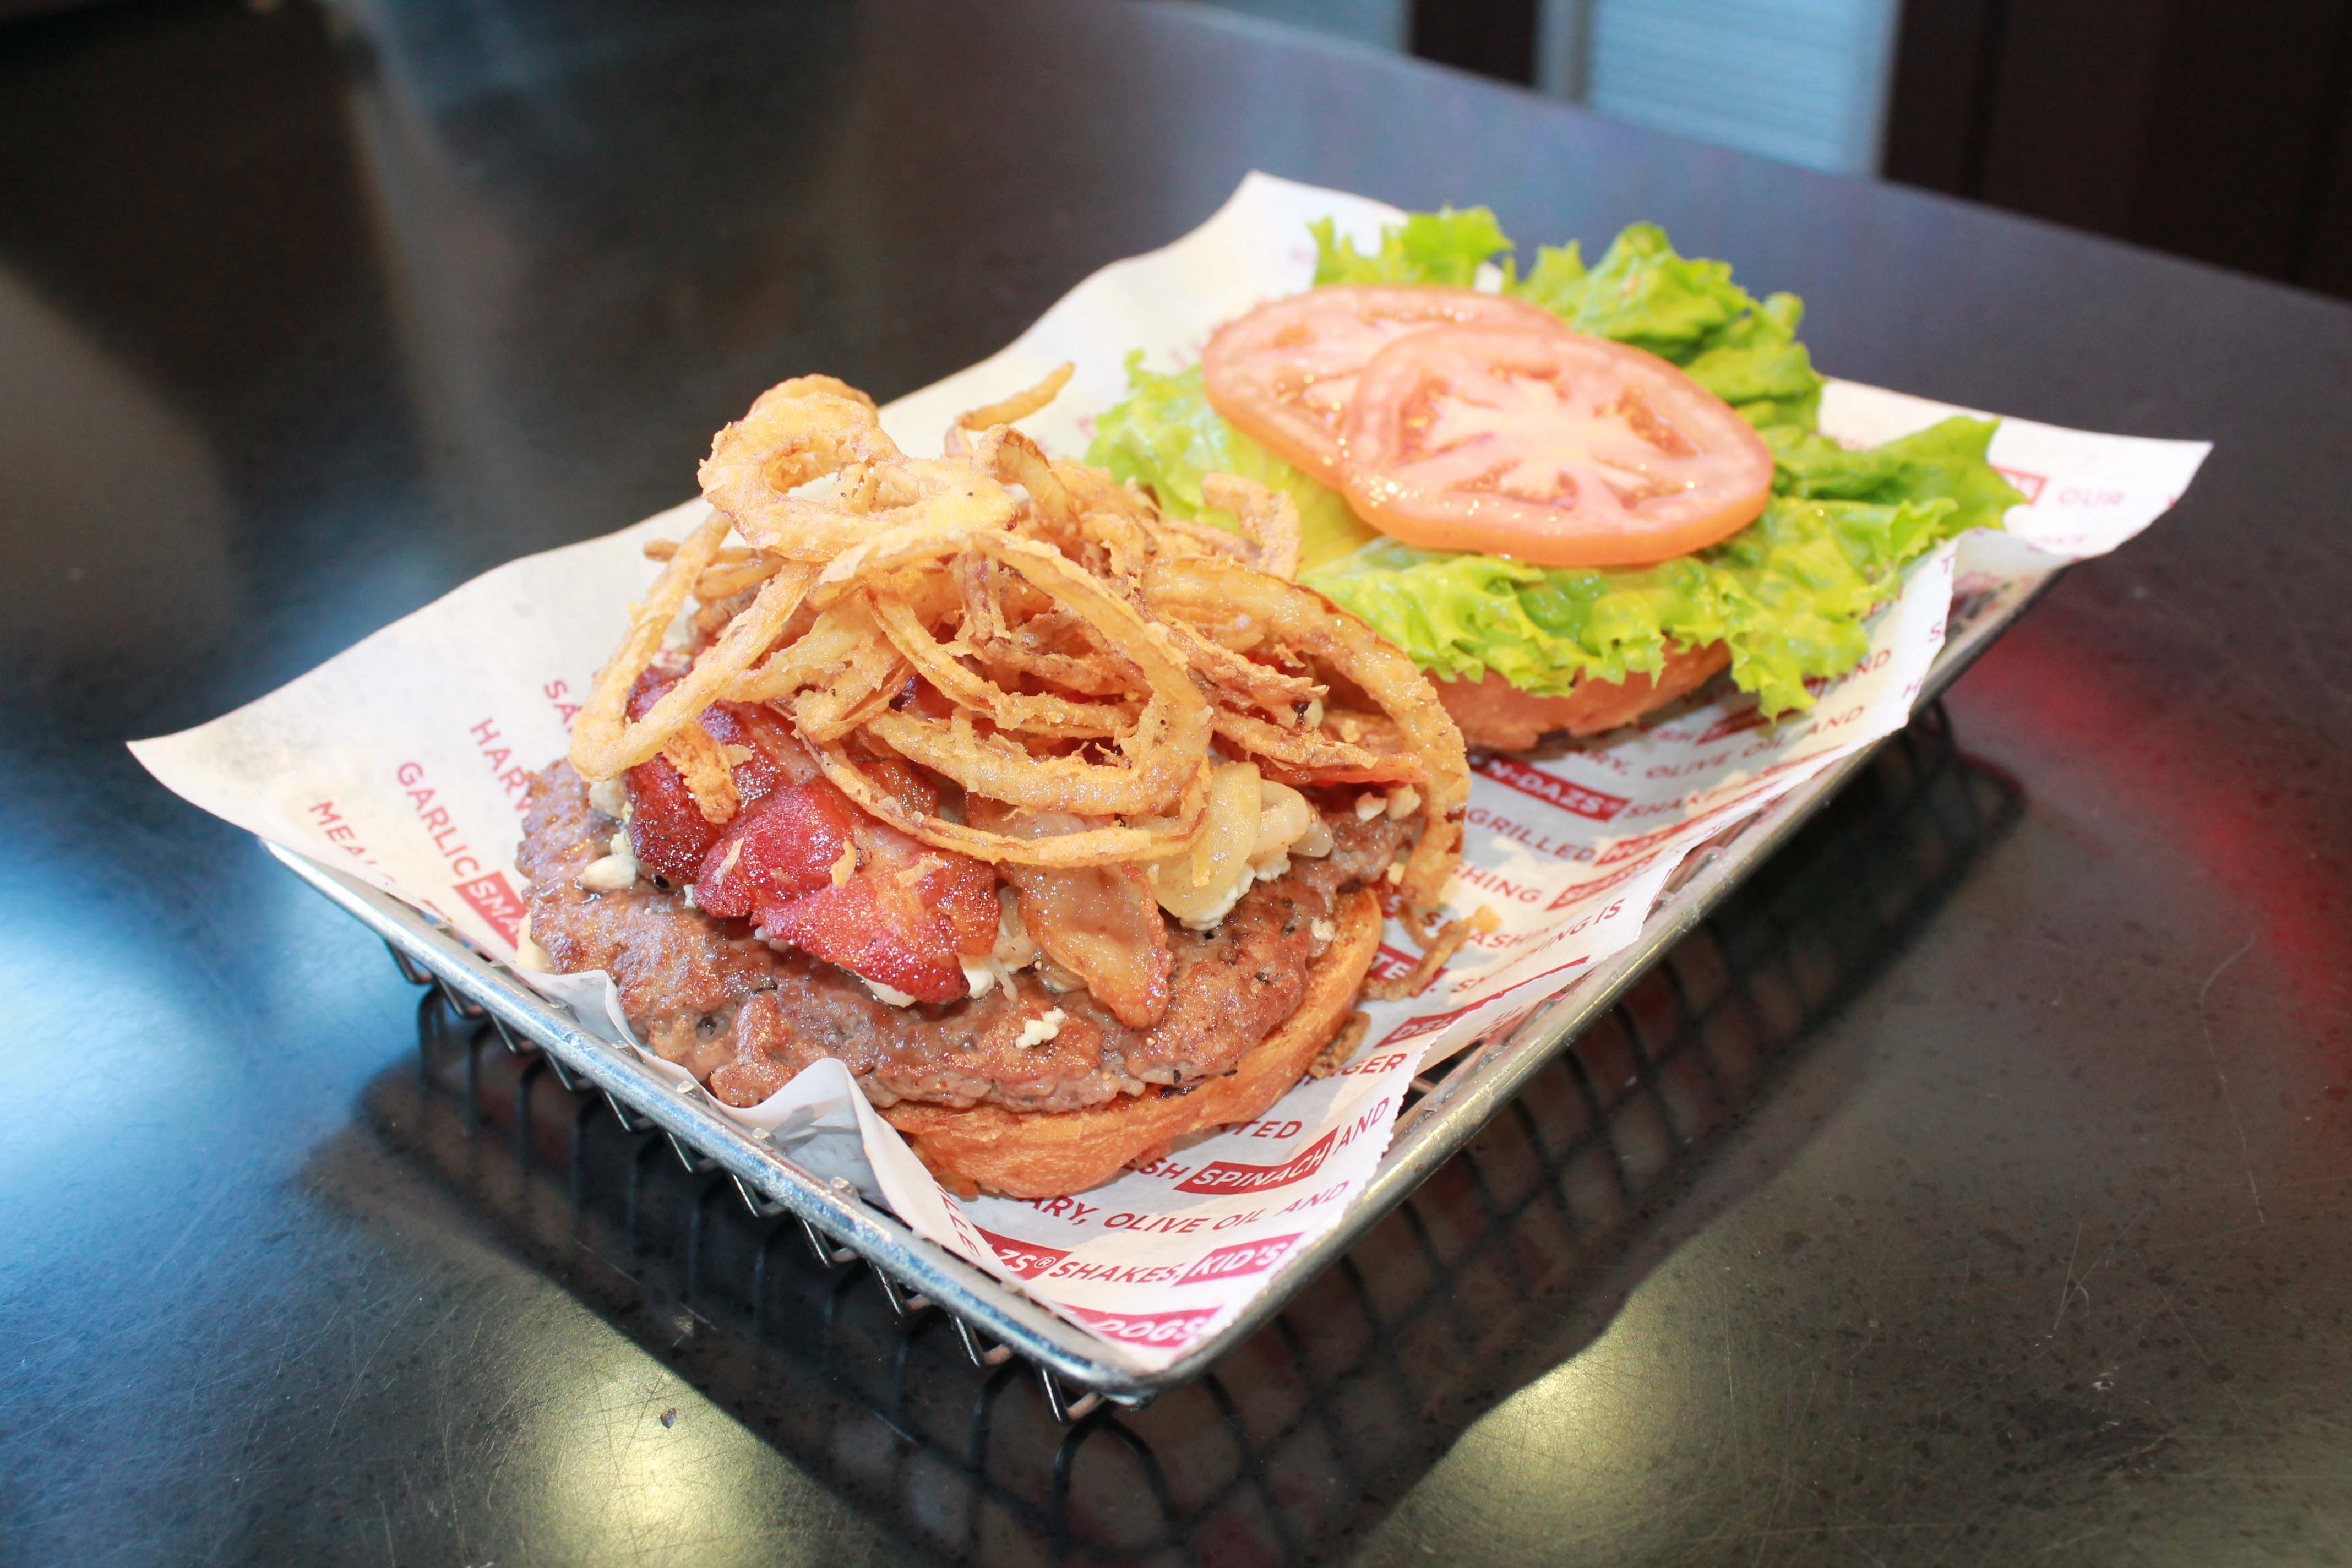 Smashburger's newly-renamed Boston Burger features Applewood-smoked bacon, blue cheese, grilled onions, haystack onions, lettuce, tomato and mayo on an onion bun. photo credit: Smashburger